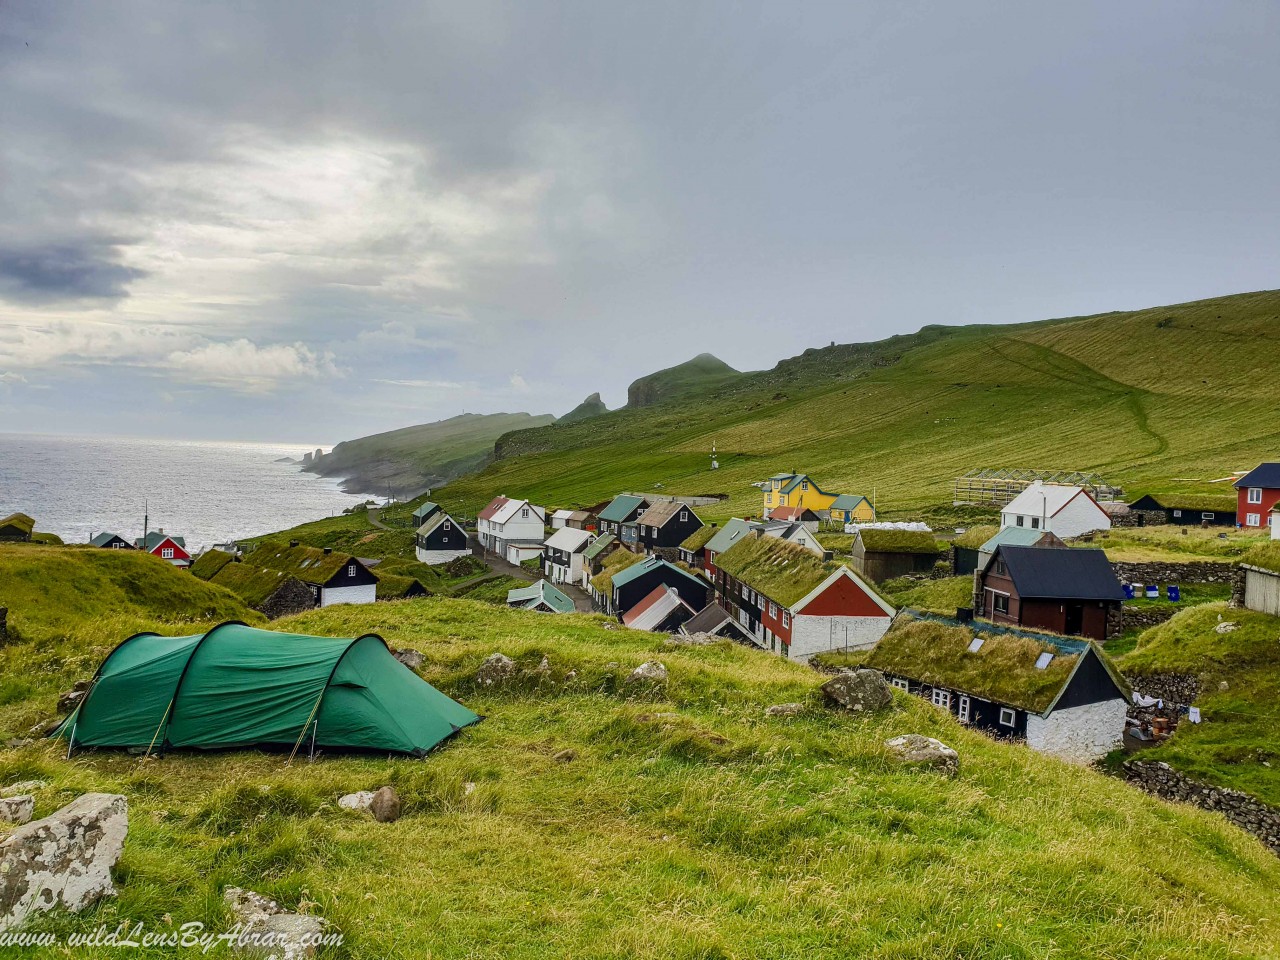 Breathtaking views from the Camping site on Mykines Island